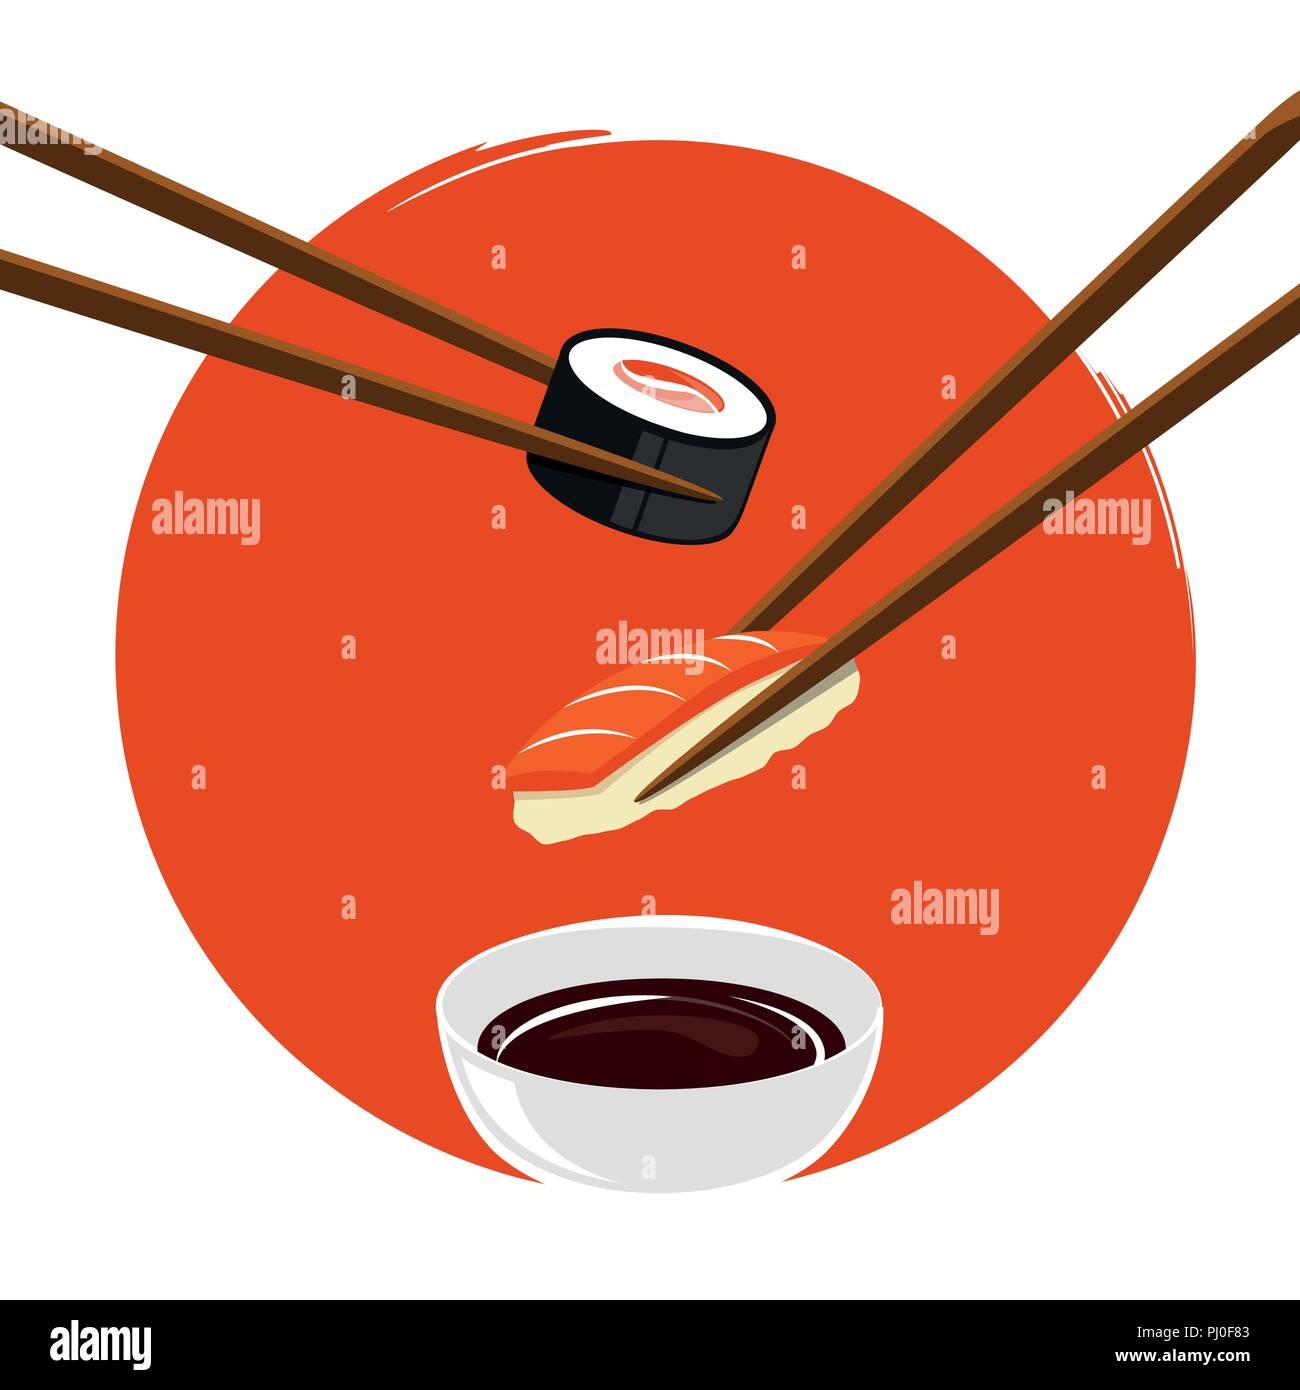 dipping sushi with salmon in soy sauce vector illustration EPS10 Stock Vector